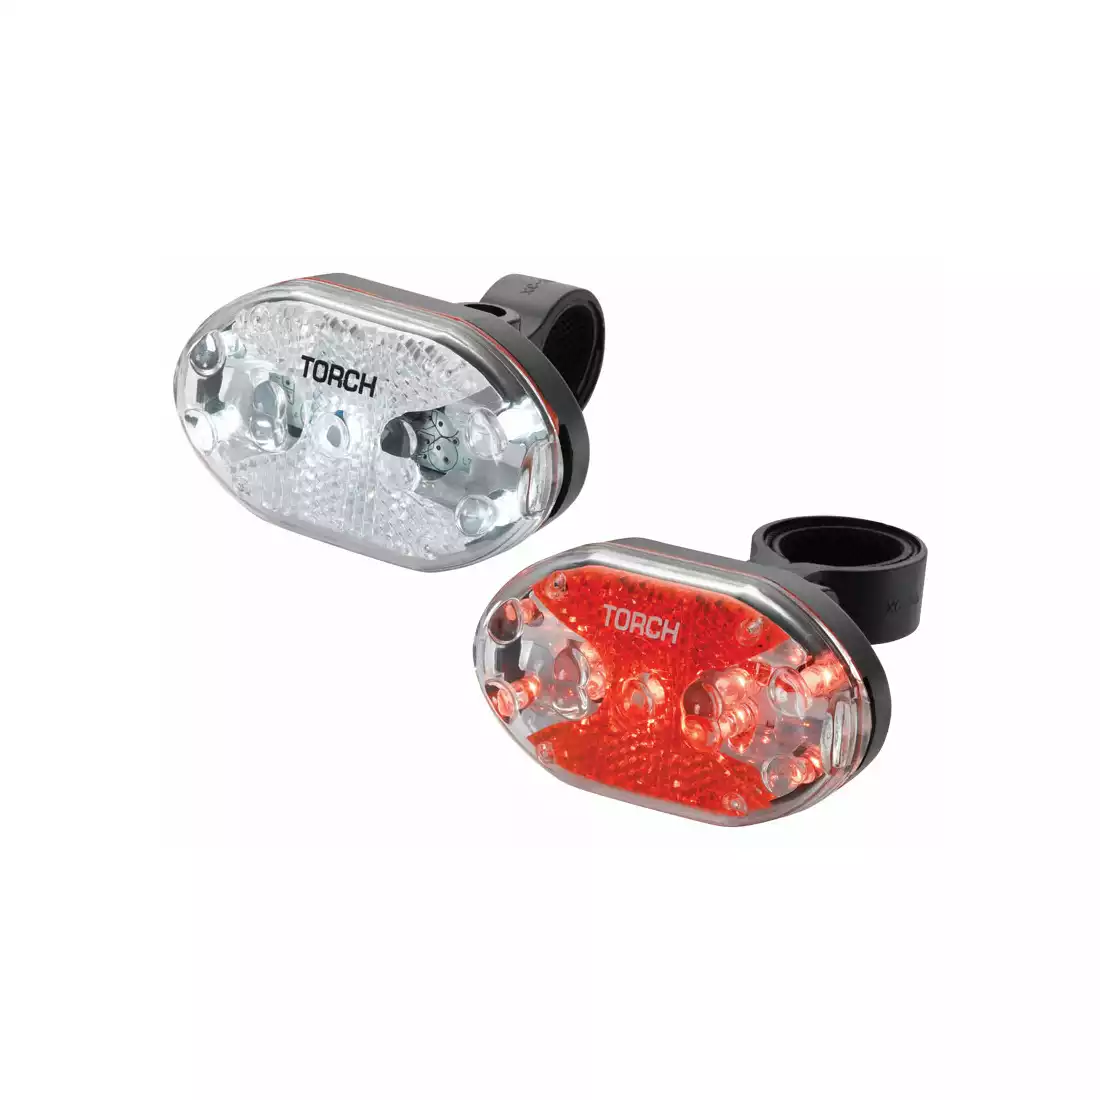 BRIGHT BATTERY OPERATED Bike Bicycle Cycle Front LED Rear Tail Lights Light Set 